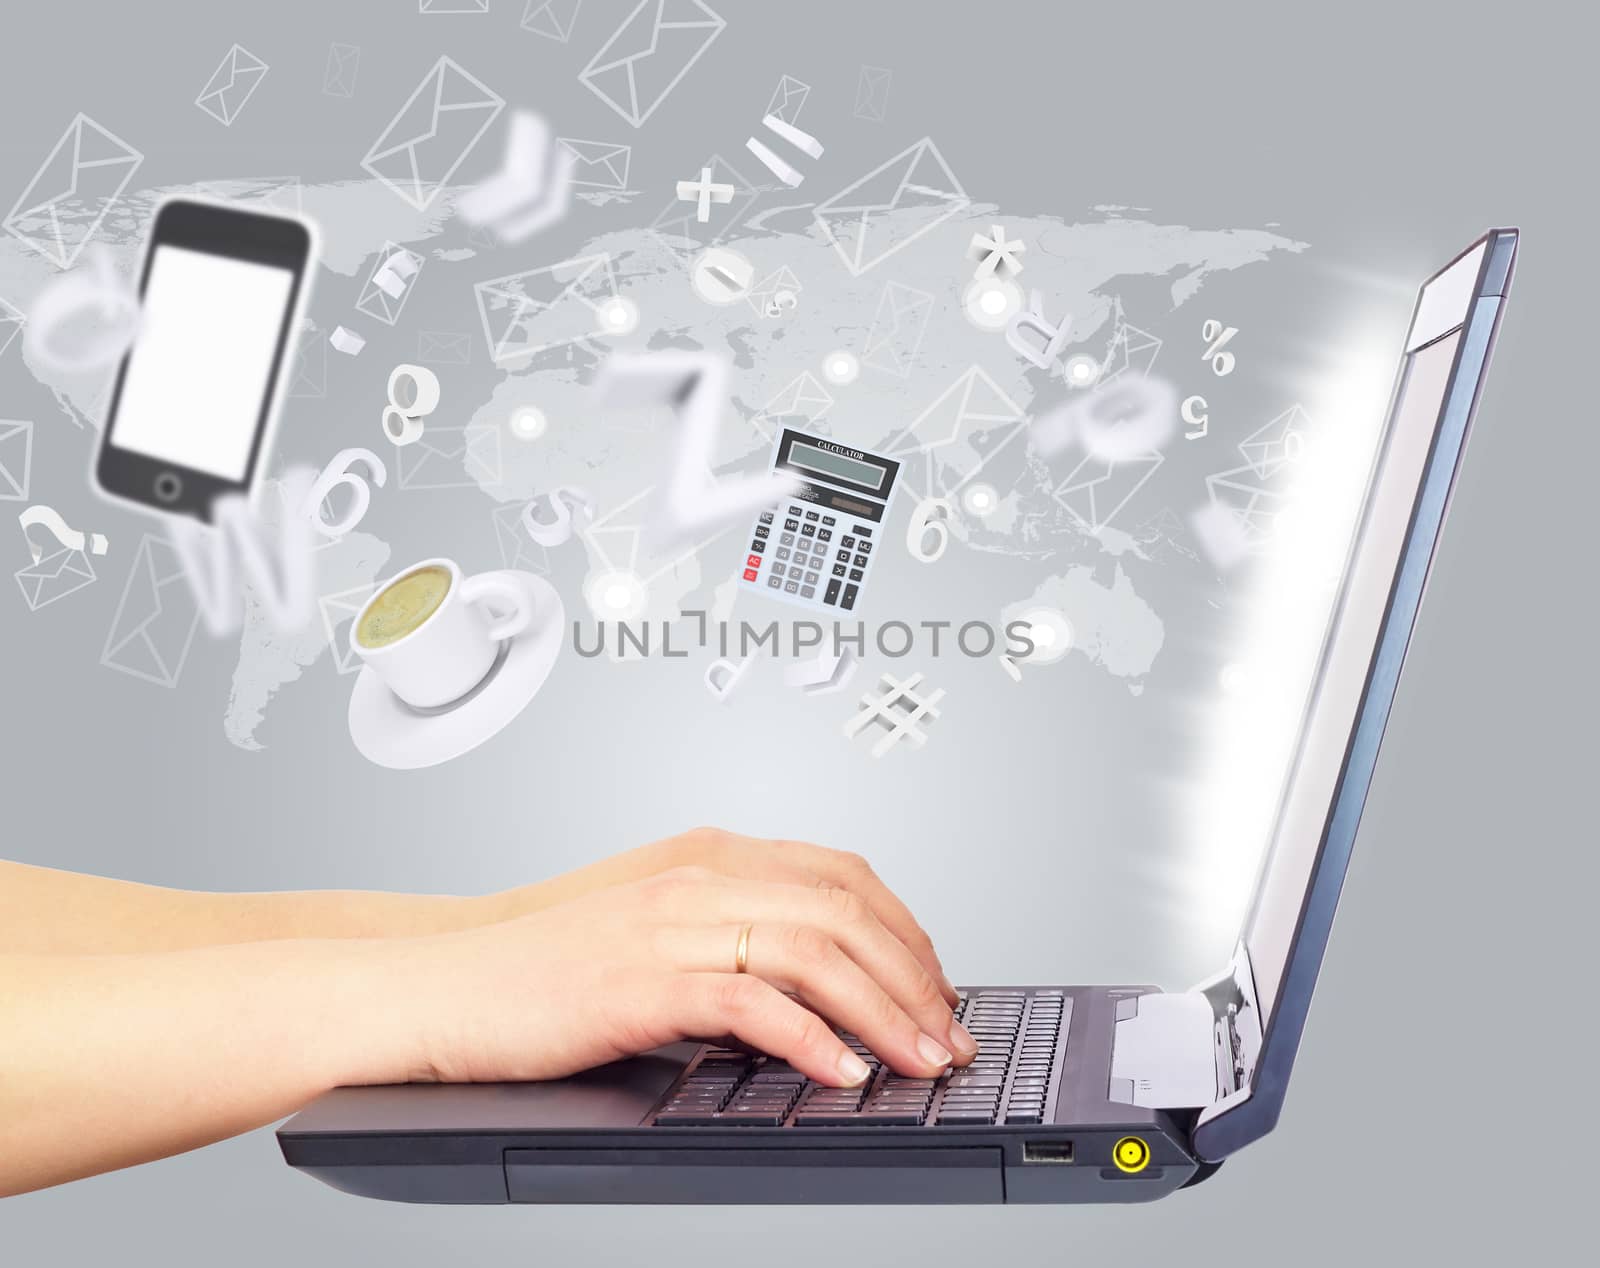 Female hands using laptop, side view. Smartphone, calculator and cup of coffee above, with envelope icons and random figures and symbols emanated by screen, on gray background with world map